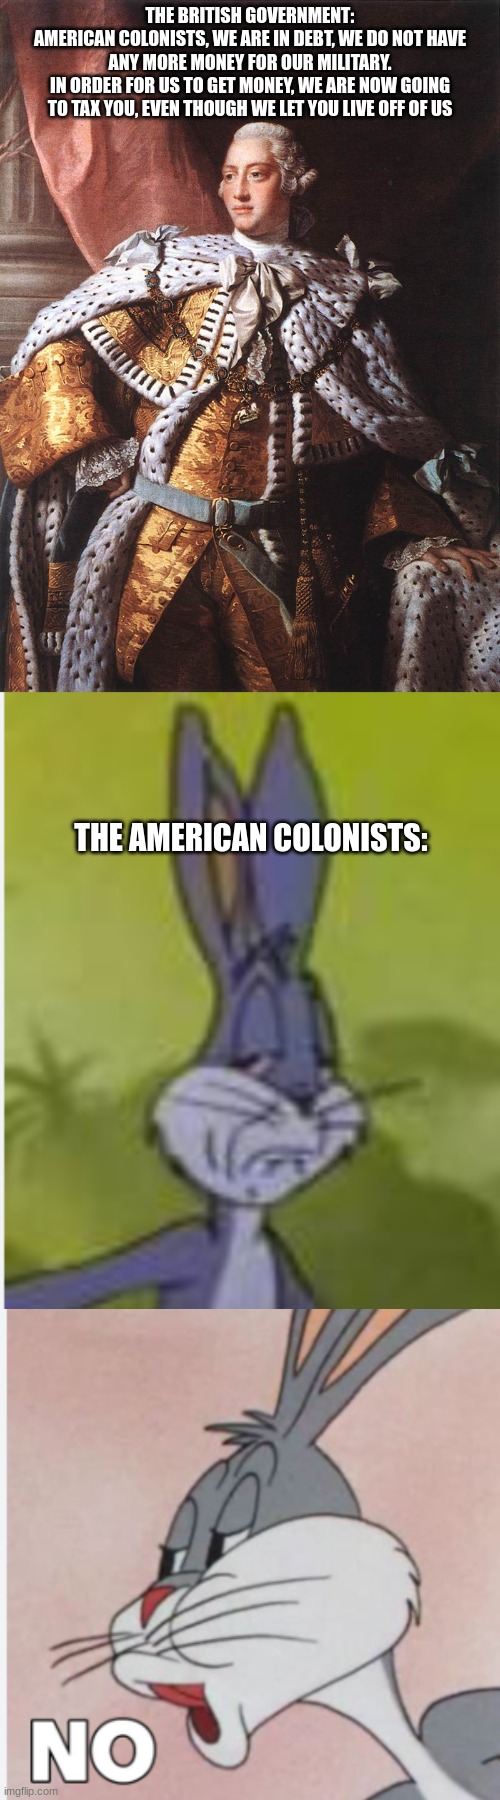 THE BRITISH GOVERNMENT:
AMERICAN COLONISTS, WE ARE IN DEBT, WE DO NOT HAVE ANY MORE MONEY FOR OUR MILITARY.
IN ORDER FOR US TO GET MONEY, WE ARE NOW GOING TO TAX YOU, EVEN THOUGH WE LET YOU LIVE OFF OF US; THE AMERICAN COLONISTS: | image tagged in king george iii | made w/ Imgflip meme maker